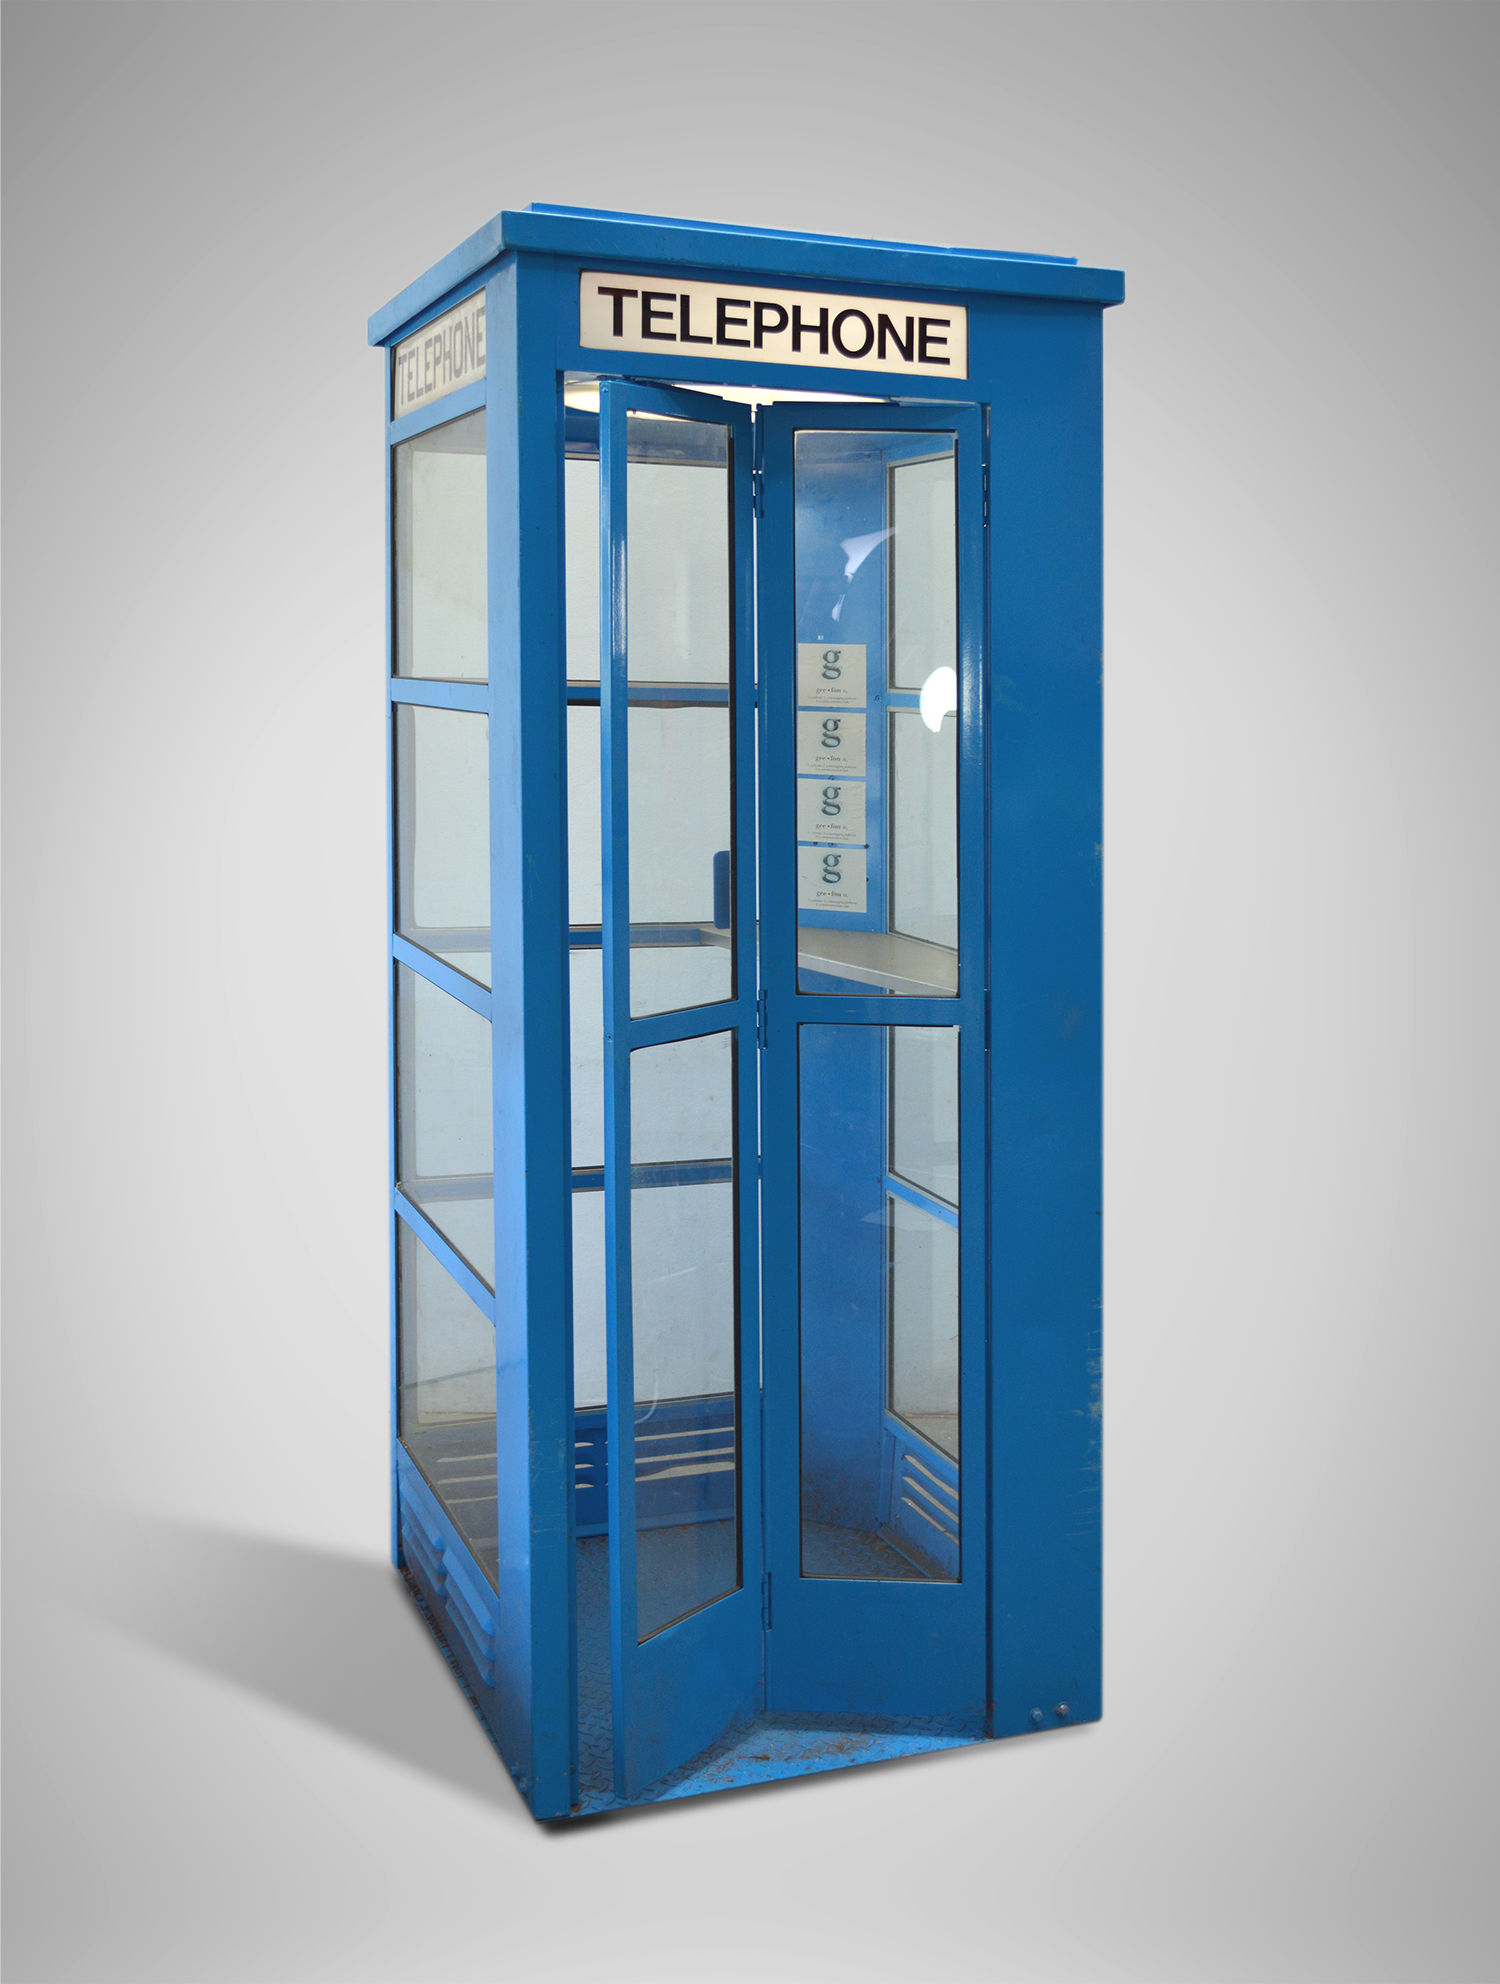 Phone both. Phone Booth. Telephone Booth. Telephone Cabin. Booth more Blue.